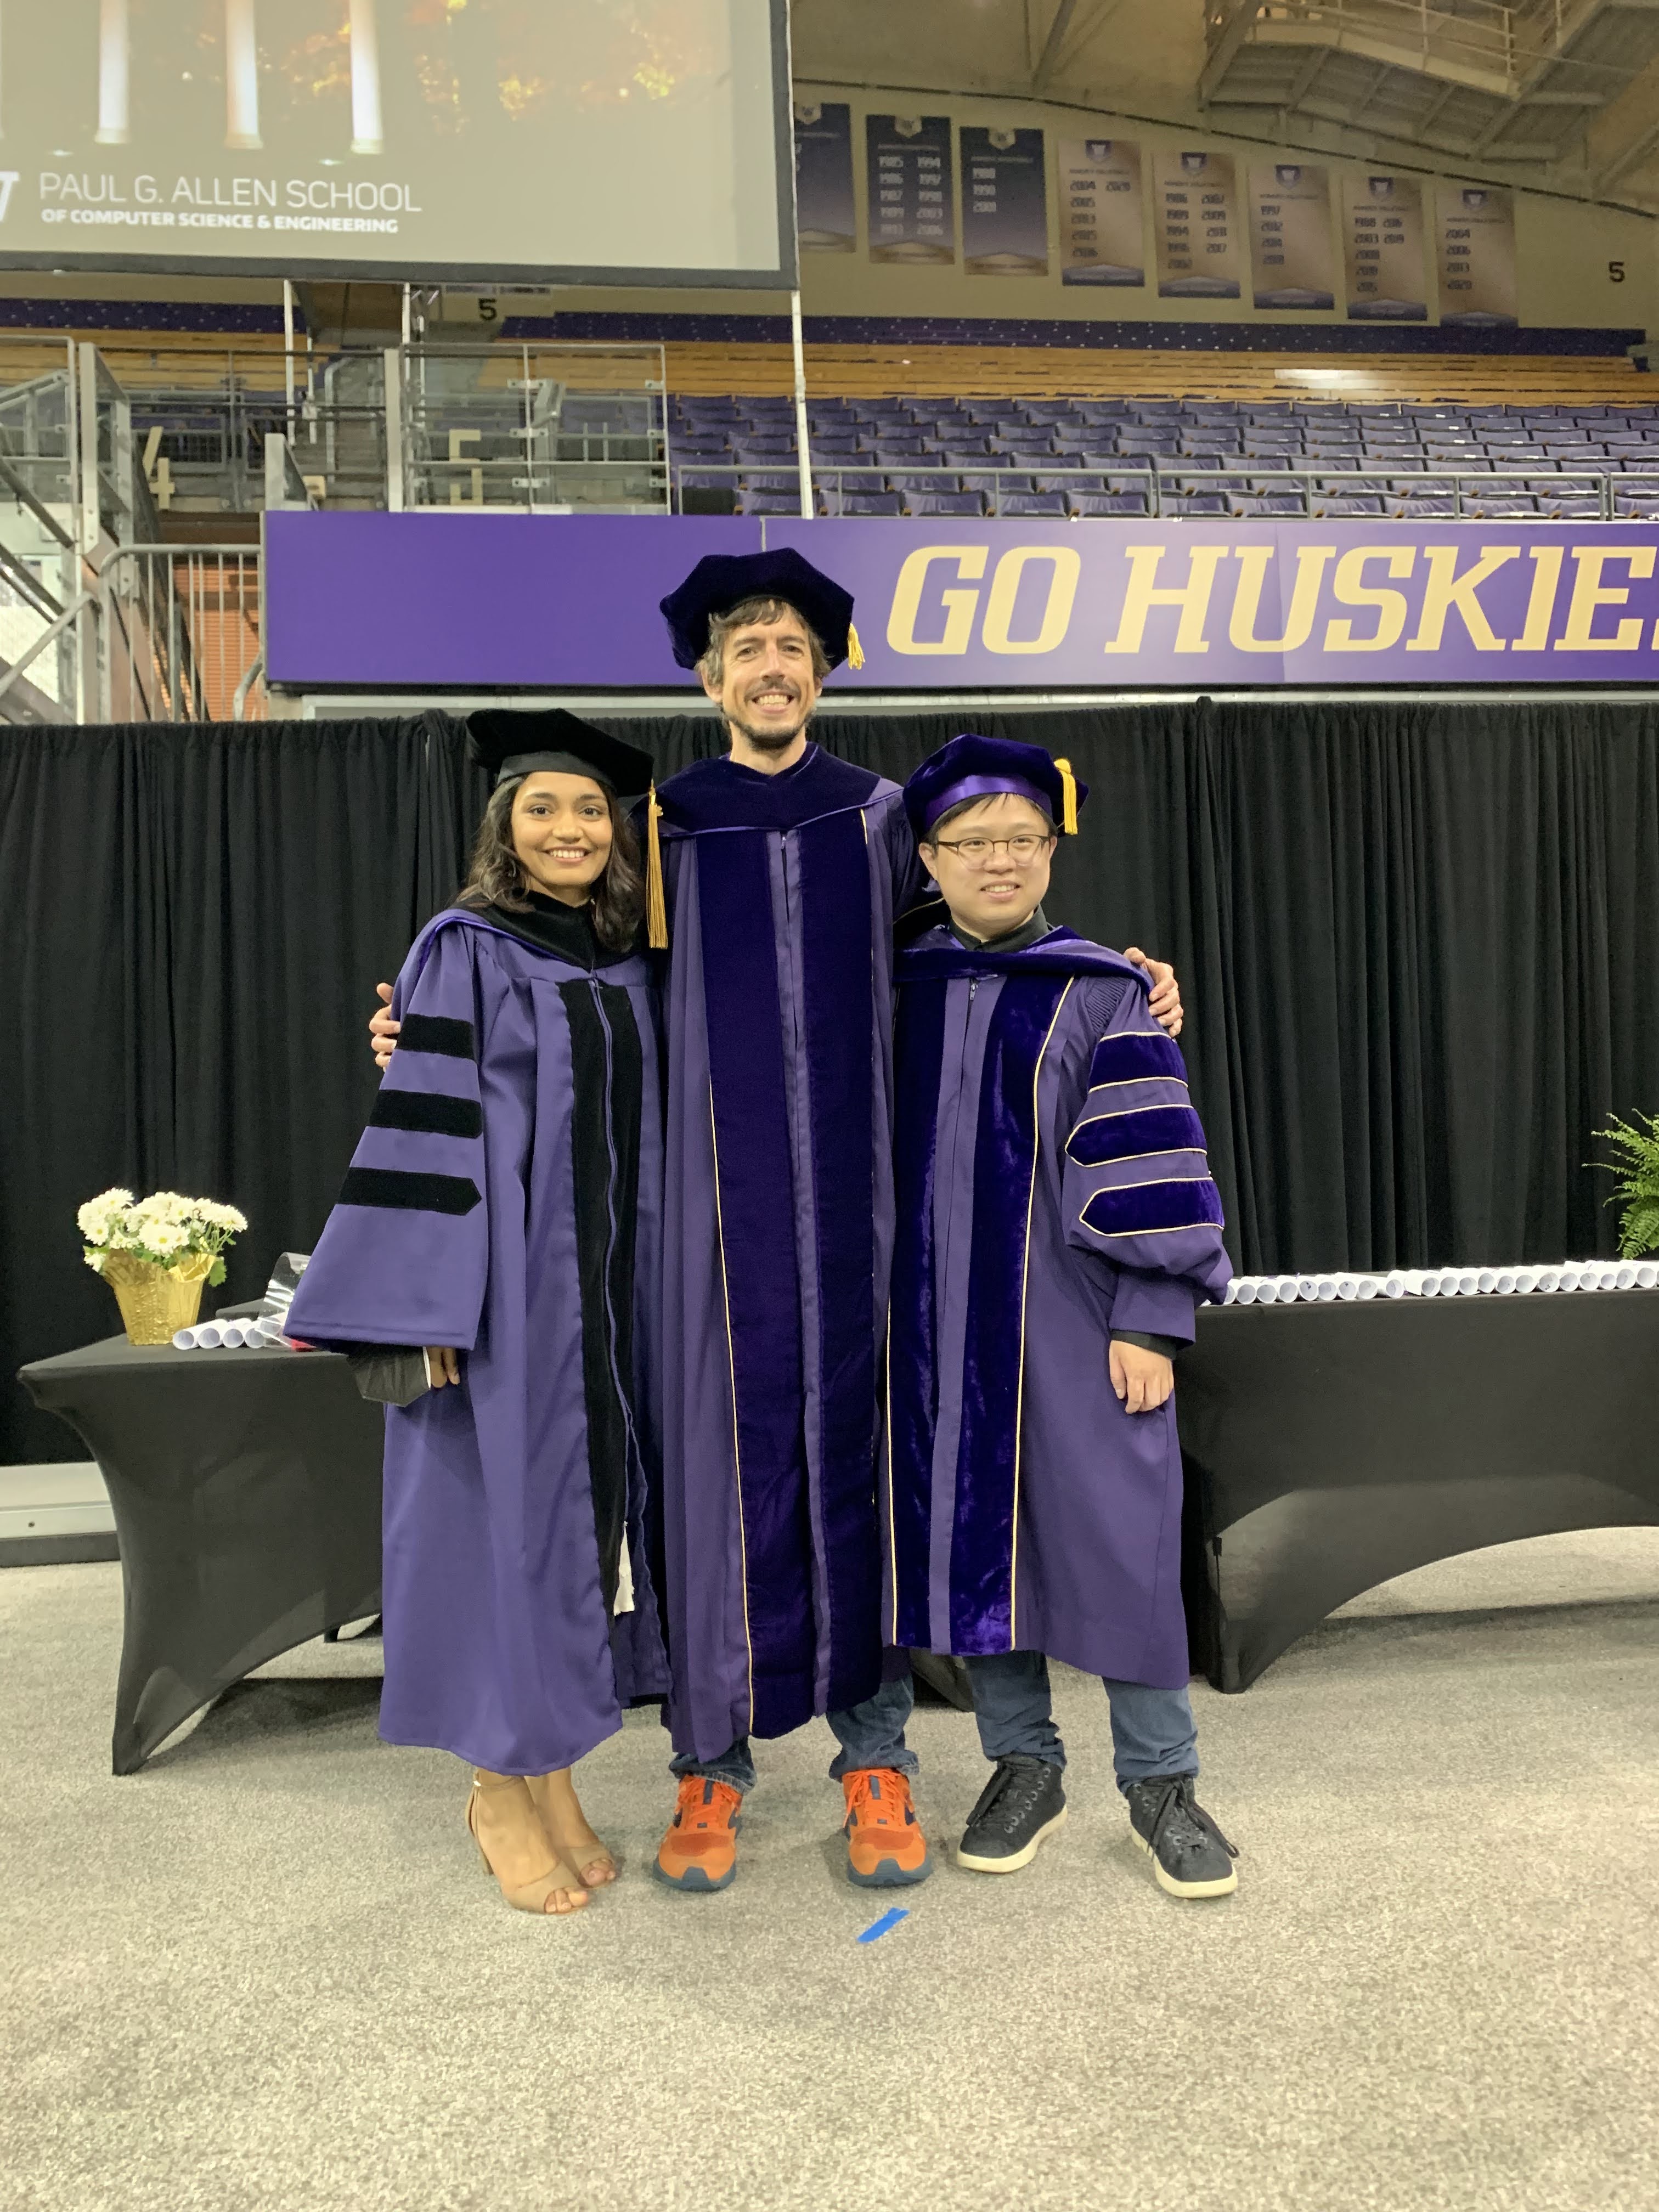 Manaswi, Jon, and Liang standing with their graduation gowns in front of the "Go Huskies! sign